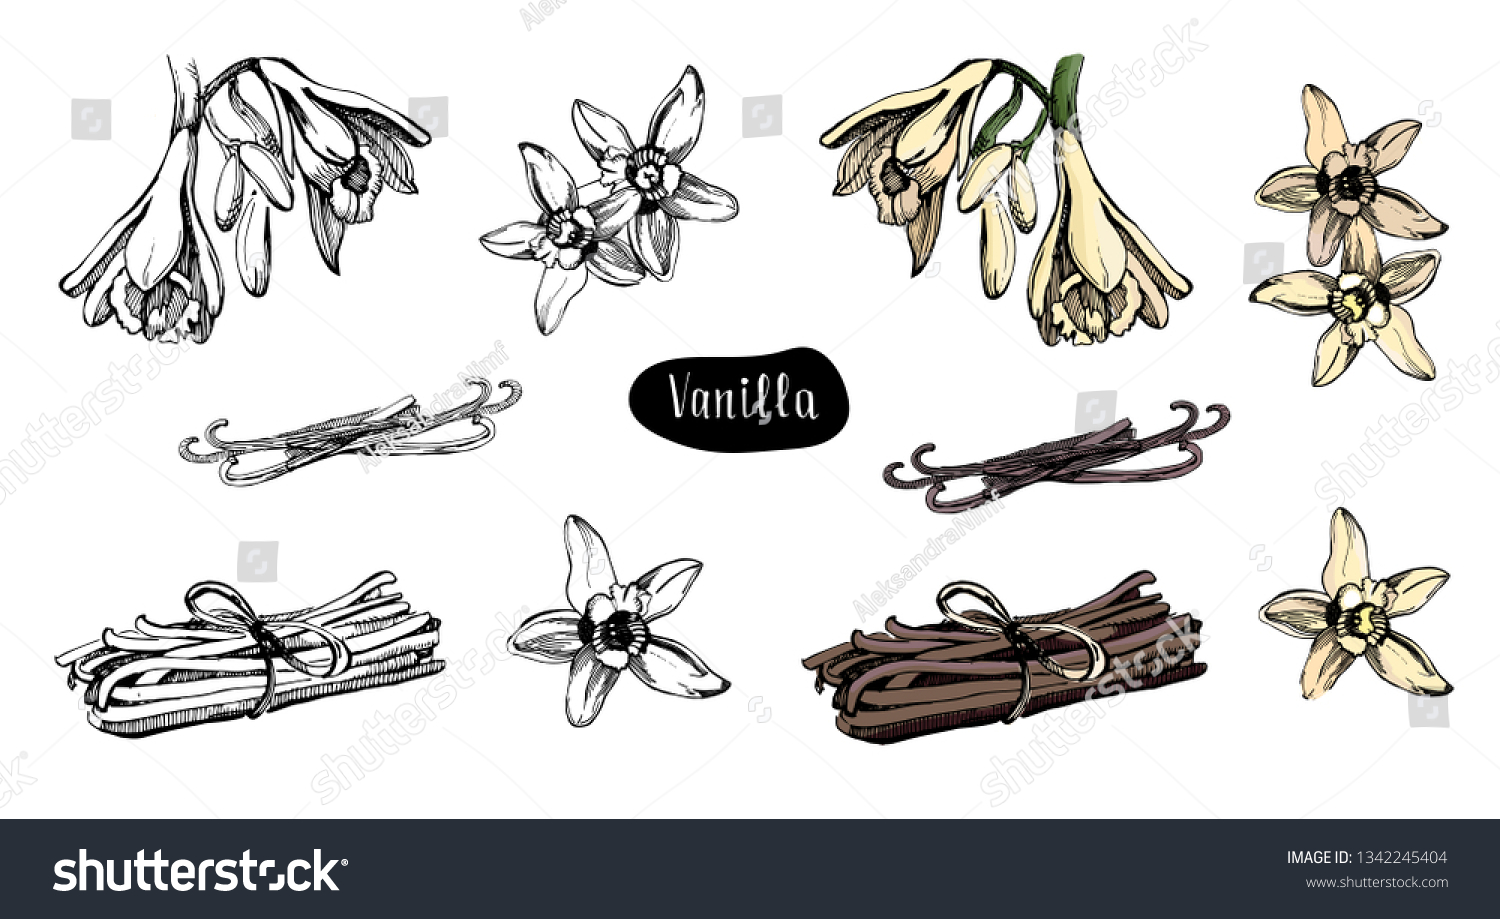 Vanilla flower isolated on the white background.Collection of vanilla flowers and vanilla sticks.Sketch illustration, colorful and black version. #1342245404